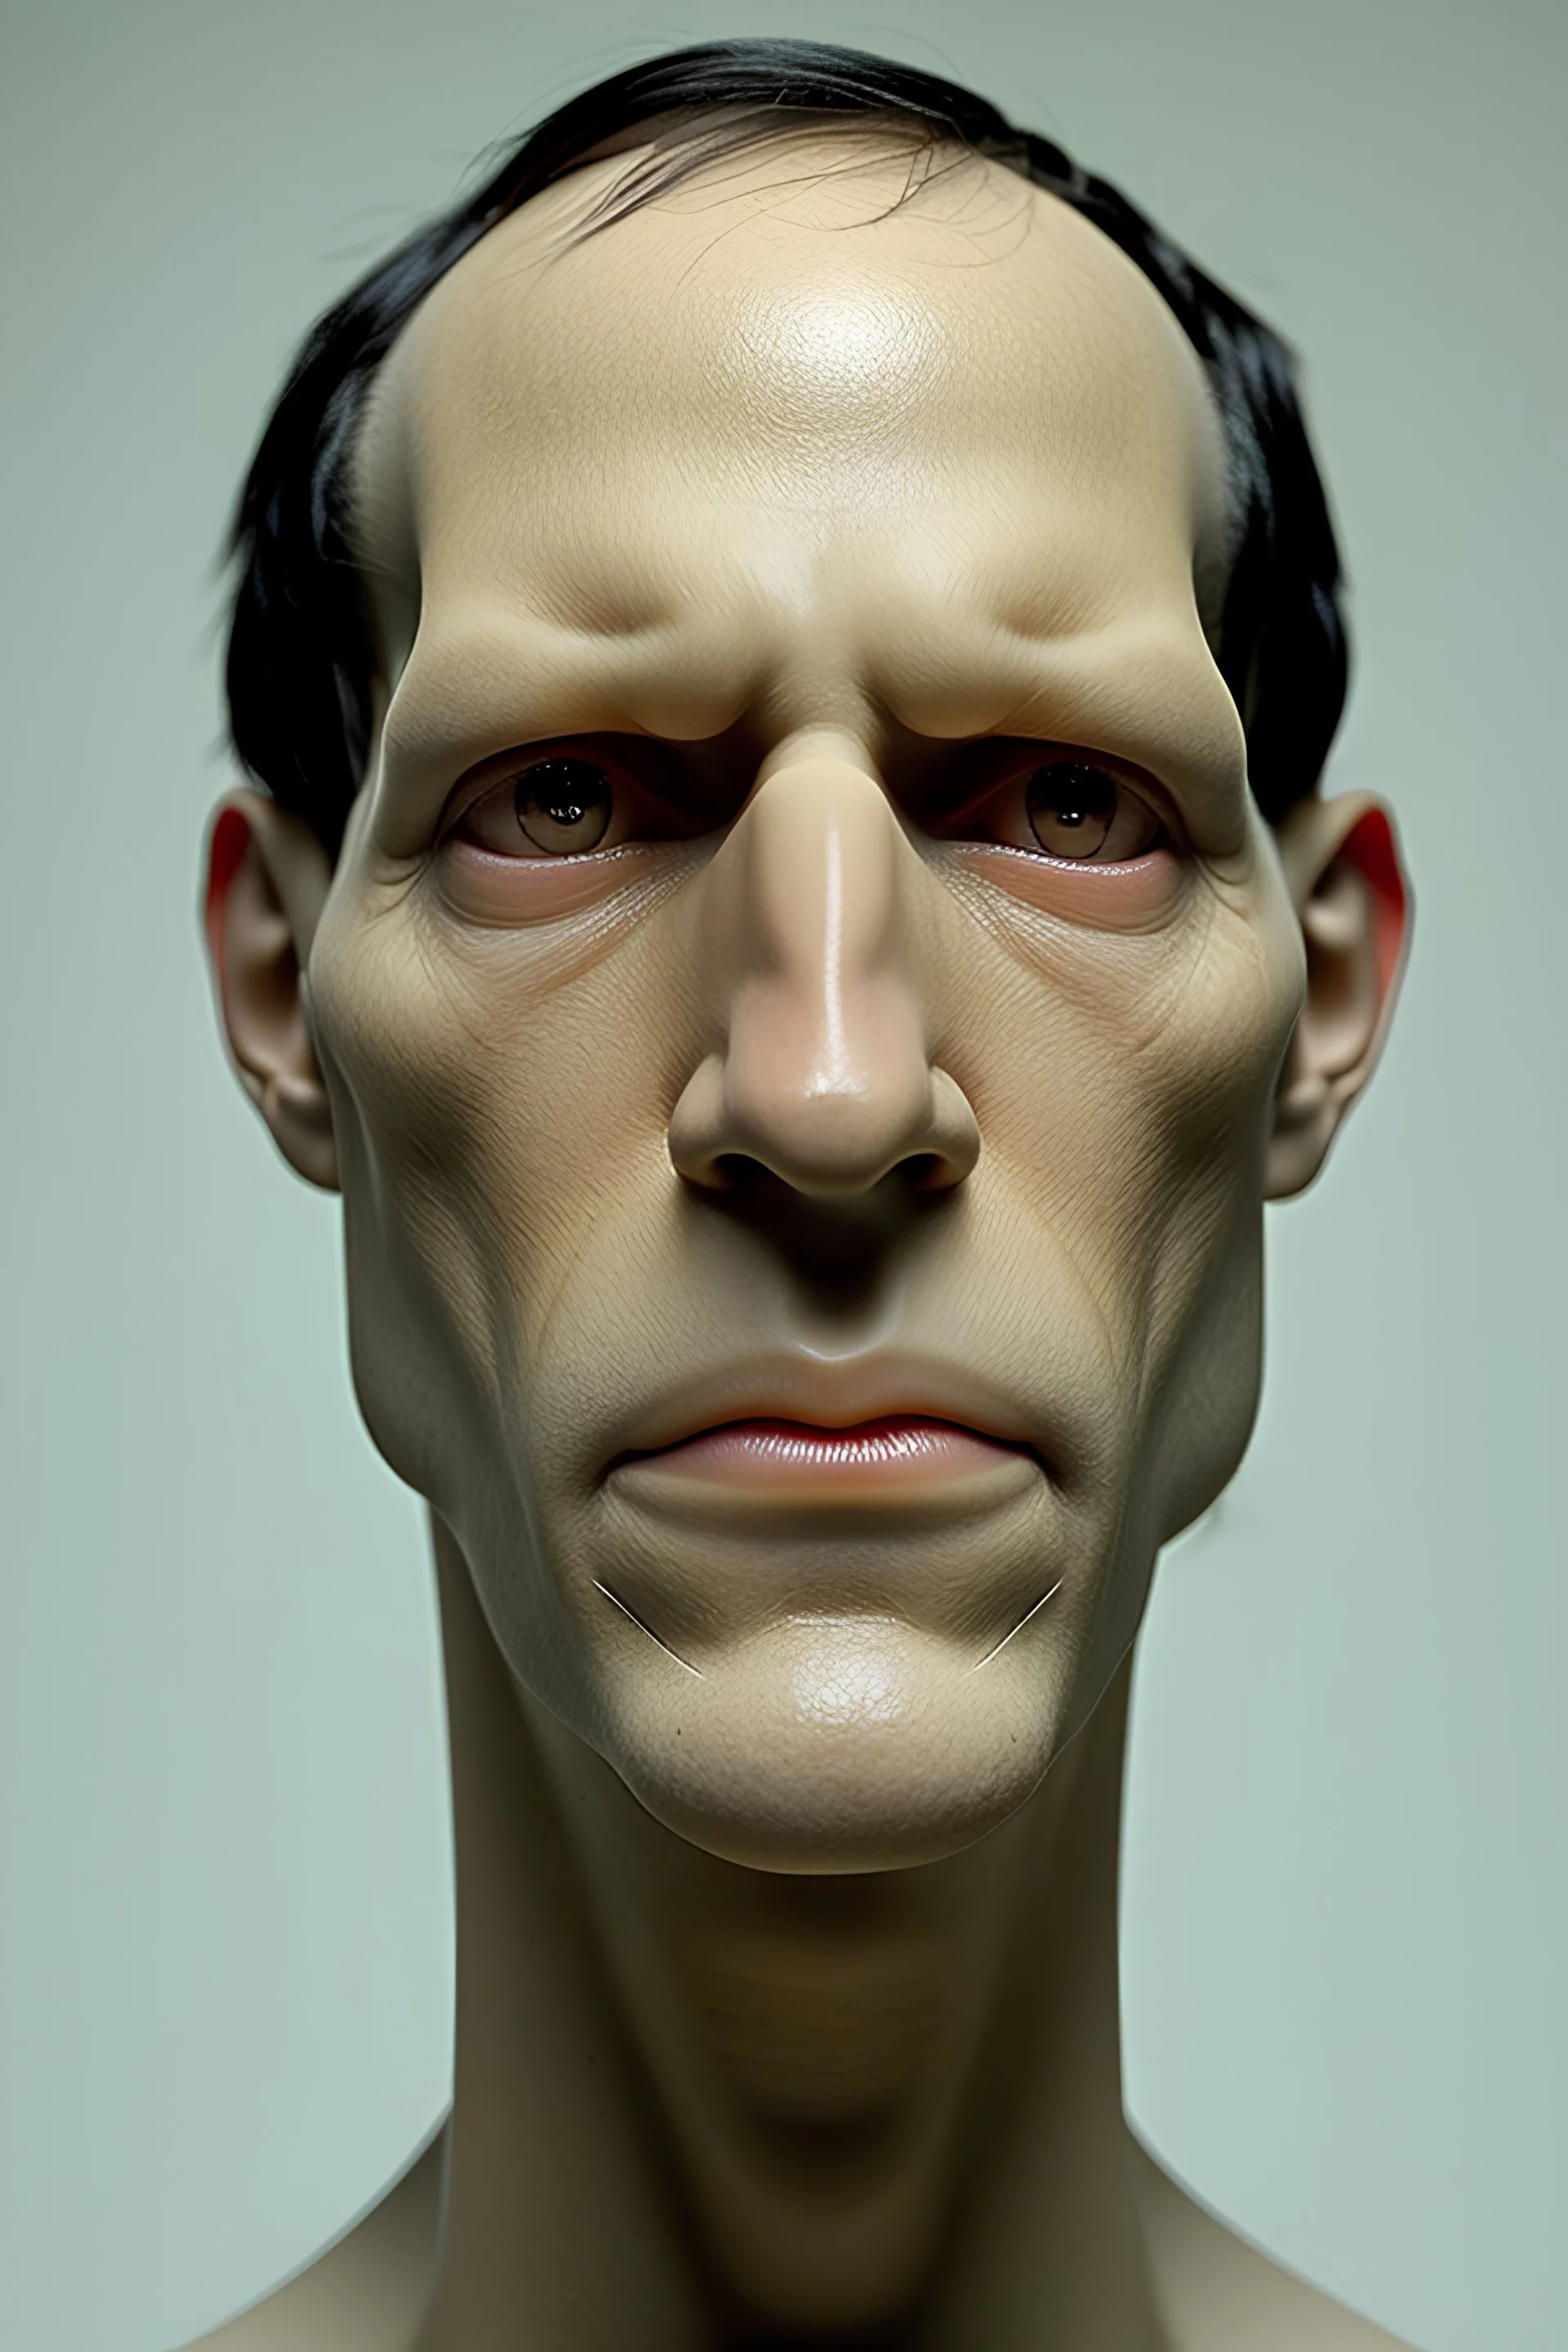 A thin professor man with sallow skin, a large hooked nose, yellow teeth, greasy black hair down to his shoulders and black eyes